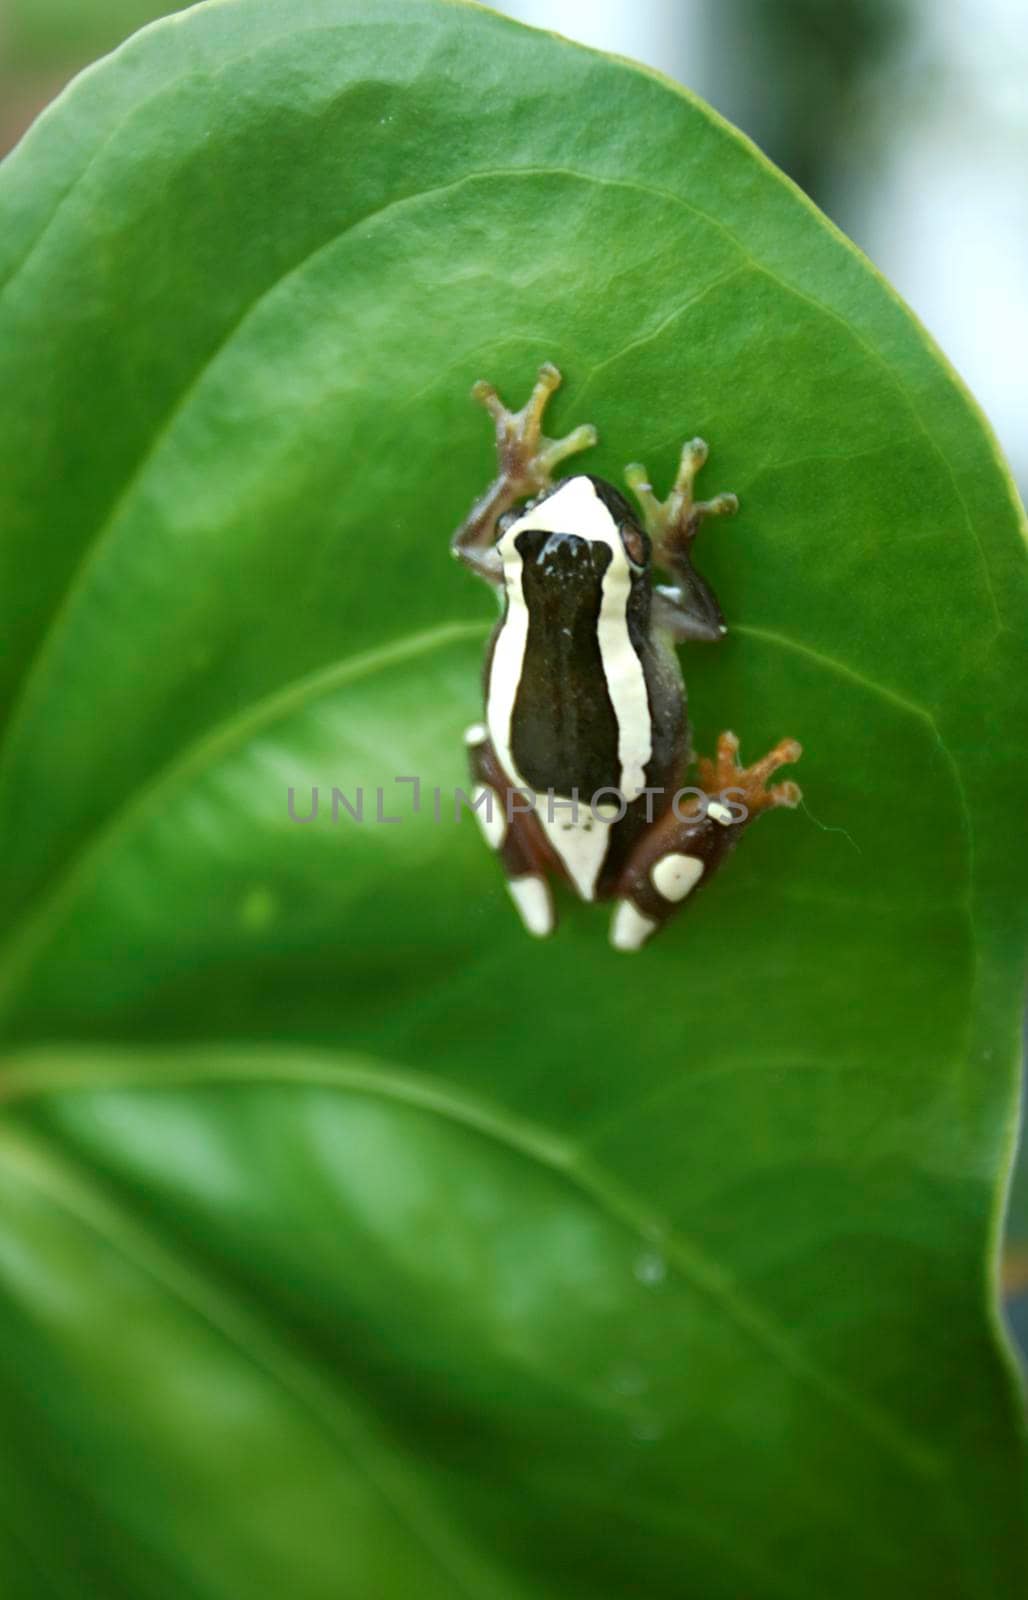 salvador, bahia / brazil - june 30, 2009: frog is spotted in a garden in the city of Salvador.